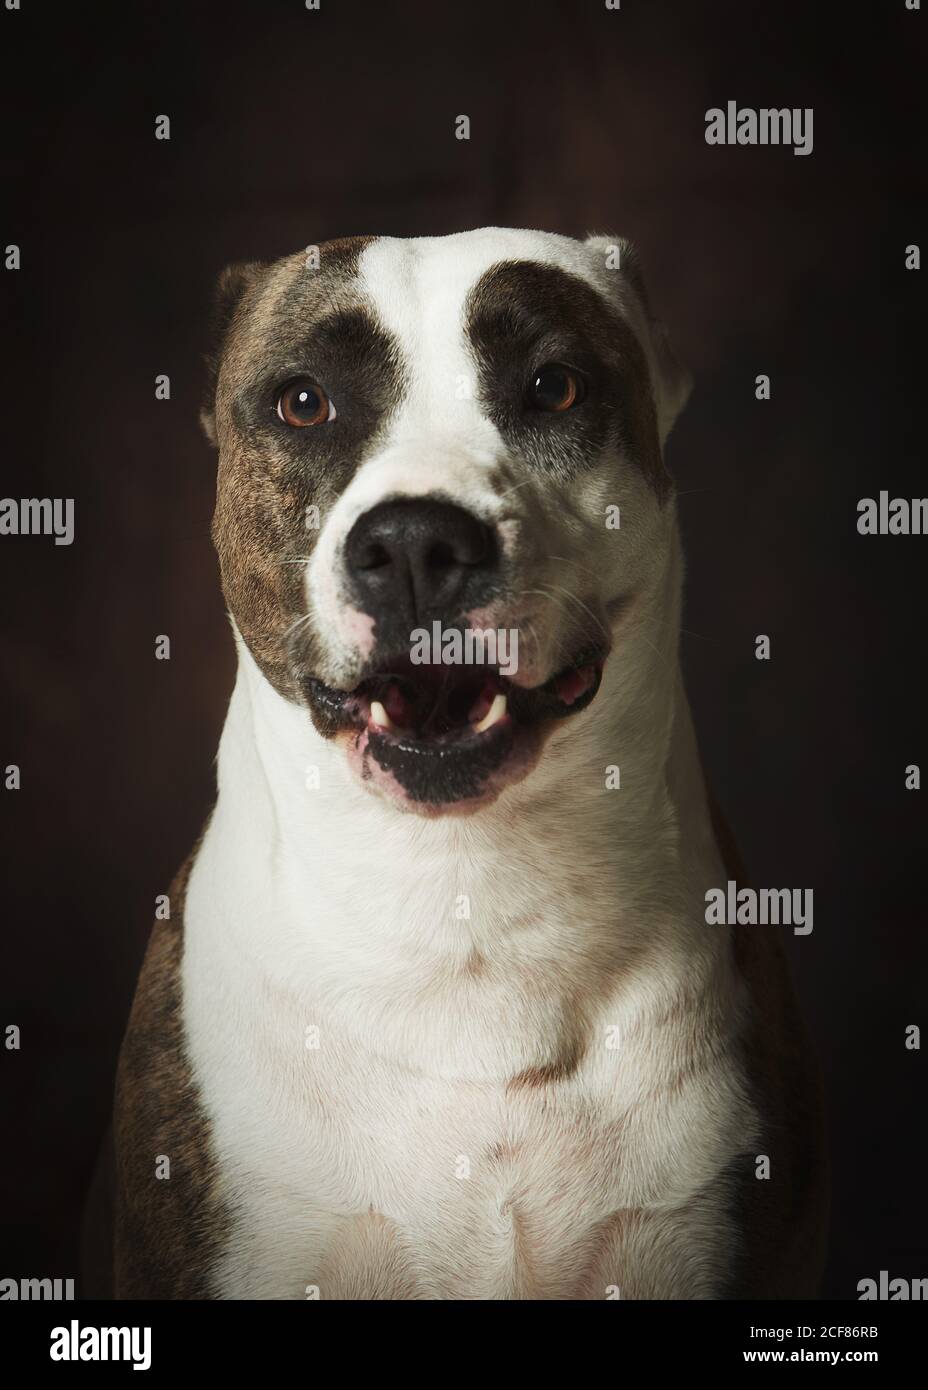 Brown and white dappled Staffordshire Terrier dog with mouth open sitting obediently and looking away with interest against dark wall Stock Photo